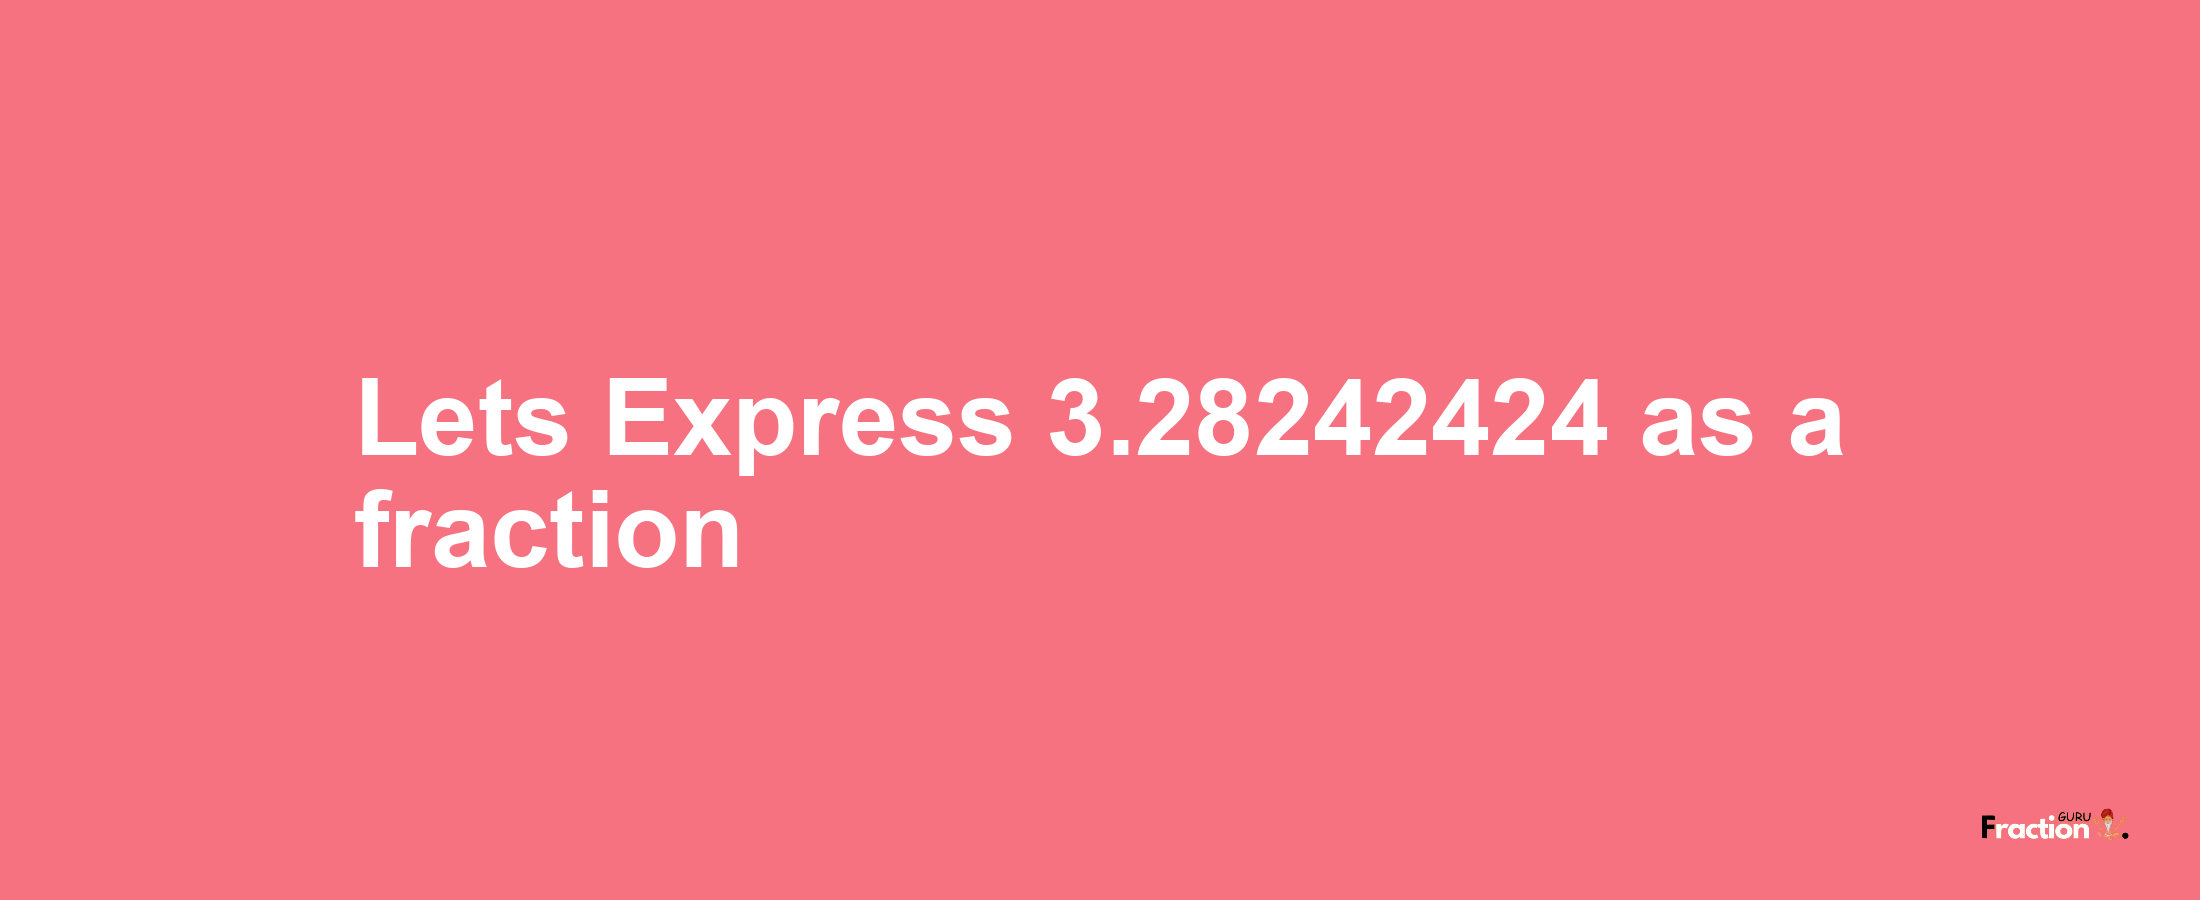 Lets Express 3.28242424 as afraction